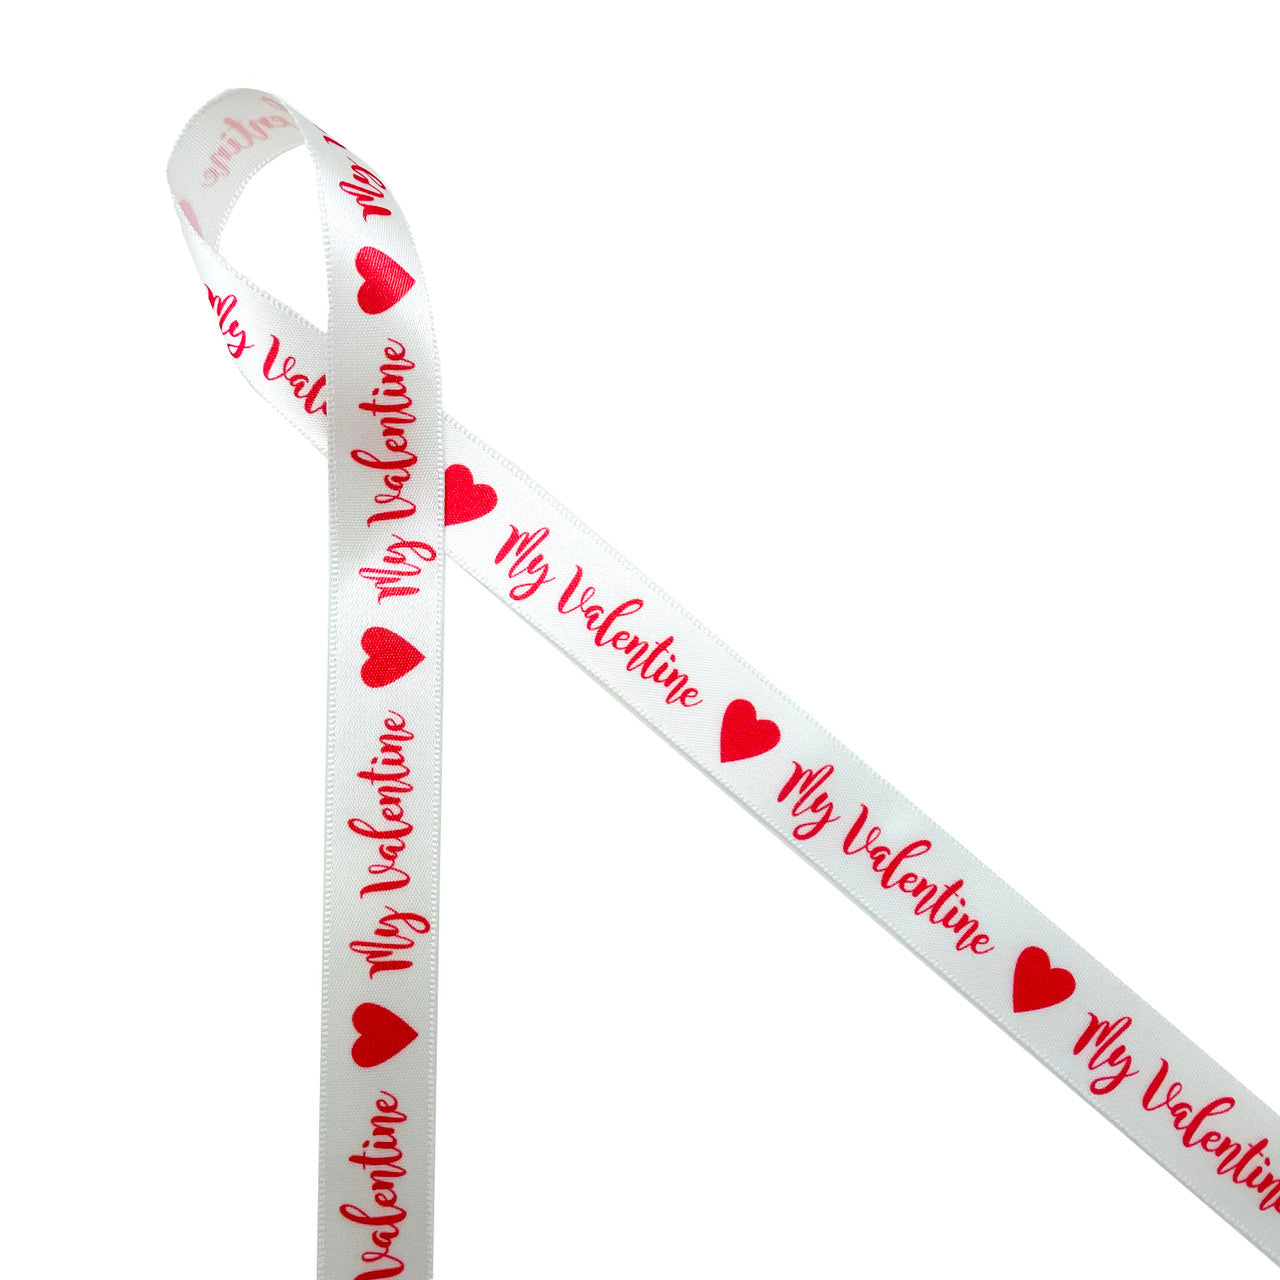 My Valentine in red with red hearts printed on 5/8"white single face satin ribbon is a fun expression of love and affection for anyone on Valentine's Day. This is a fun ribbon for gift wrap, gift baskets, party favors, candy shops and chocolatiers. Use this ribbon on cookie favors, cake pops and sweets tables too! All our ribbon is designed and printed in the USA